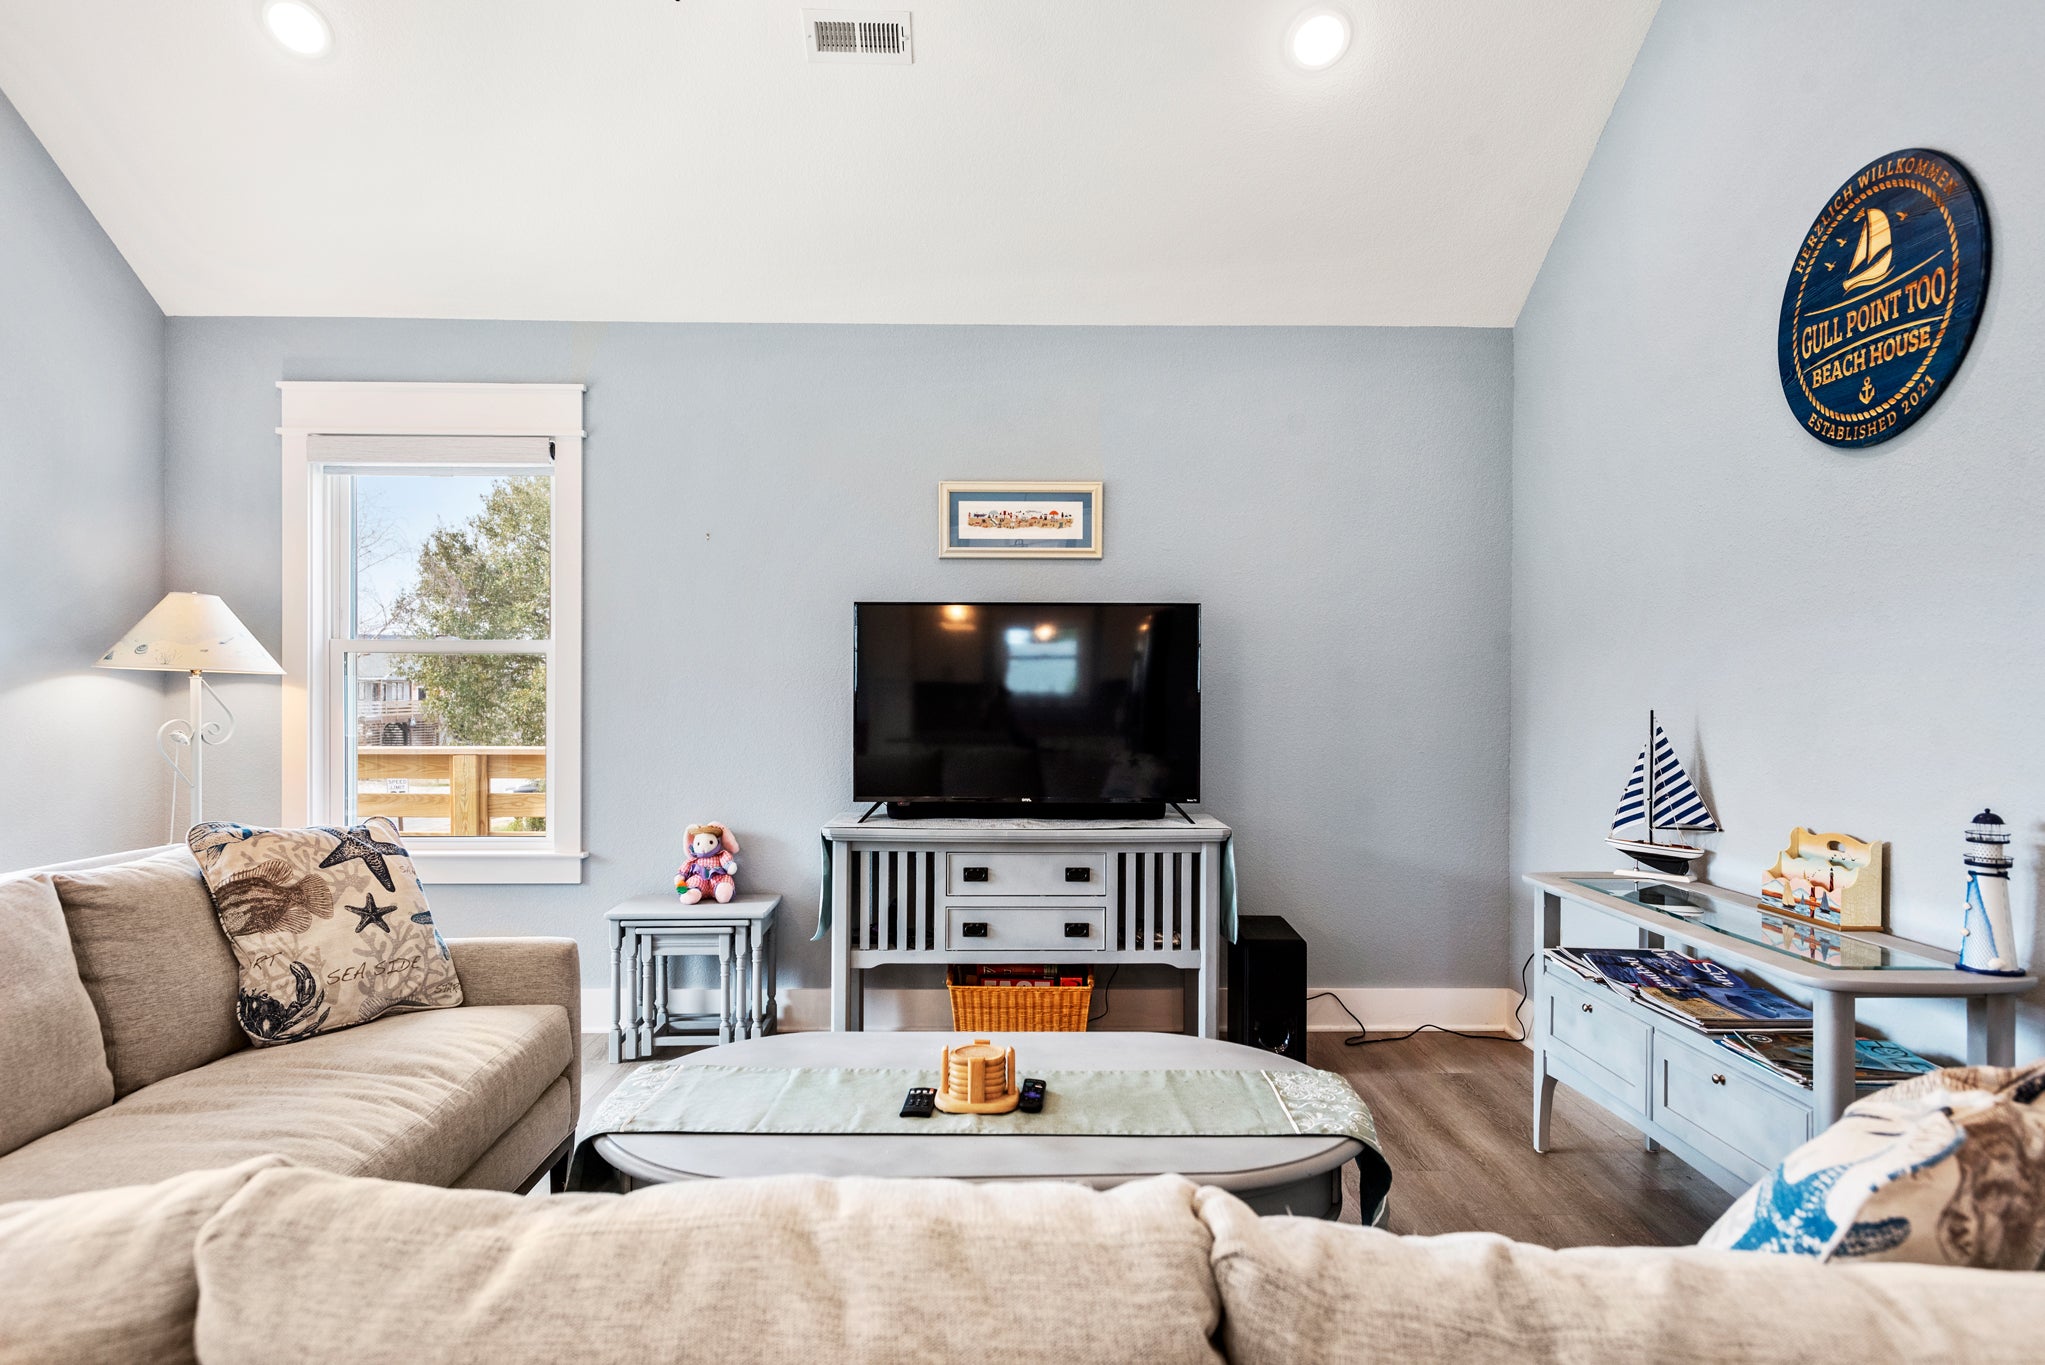 KDN9505: Gull Point Too | Living Area